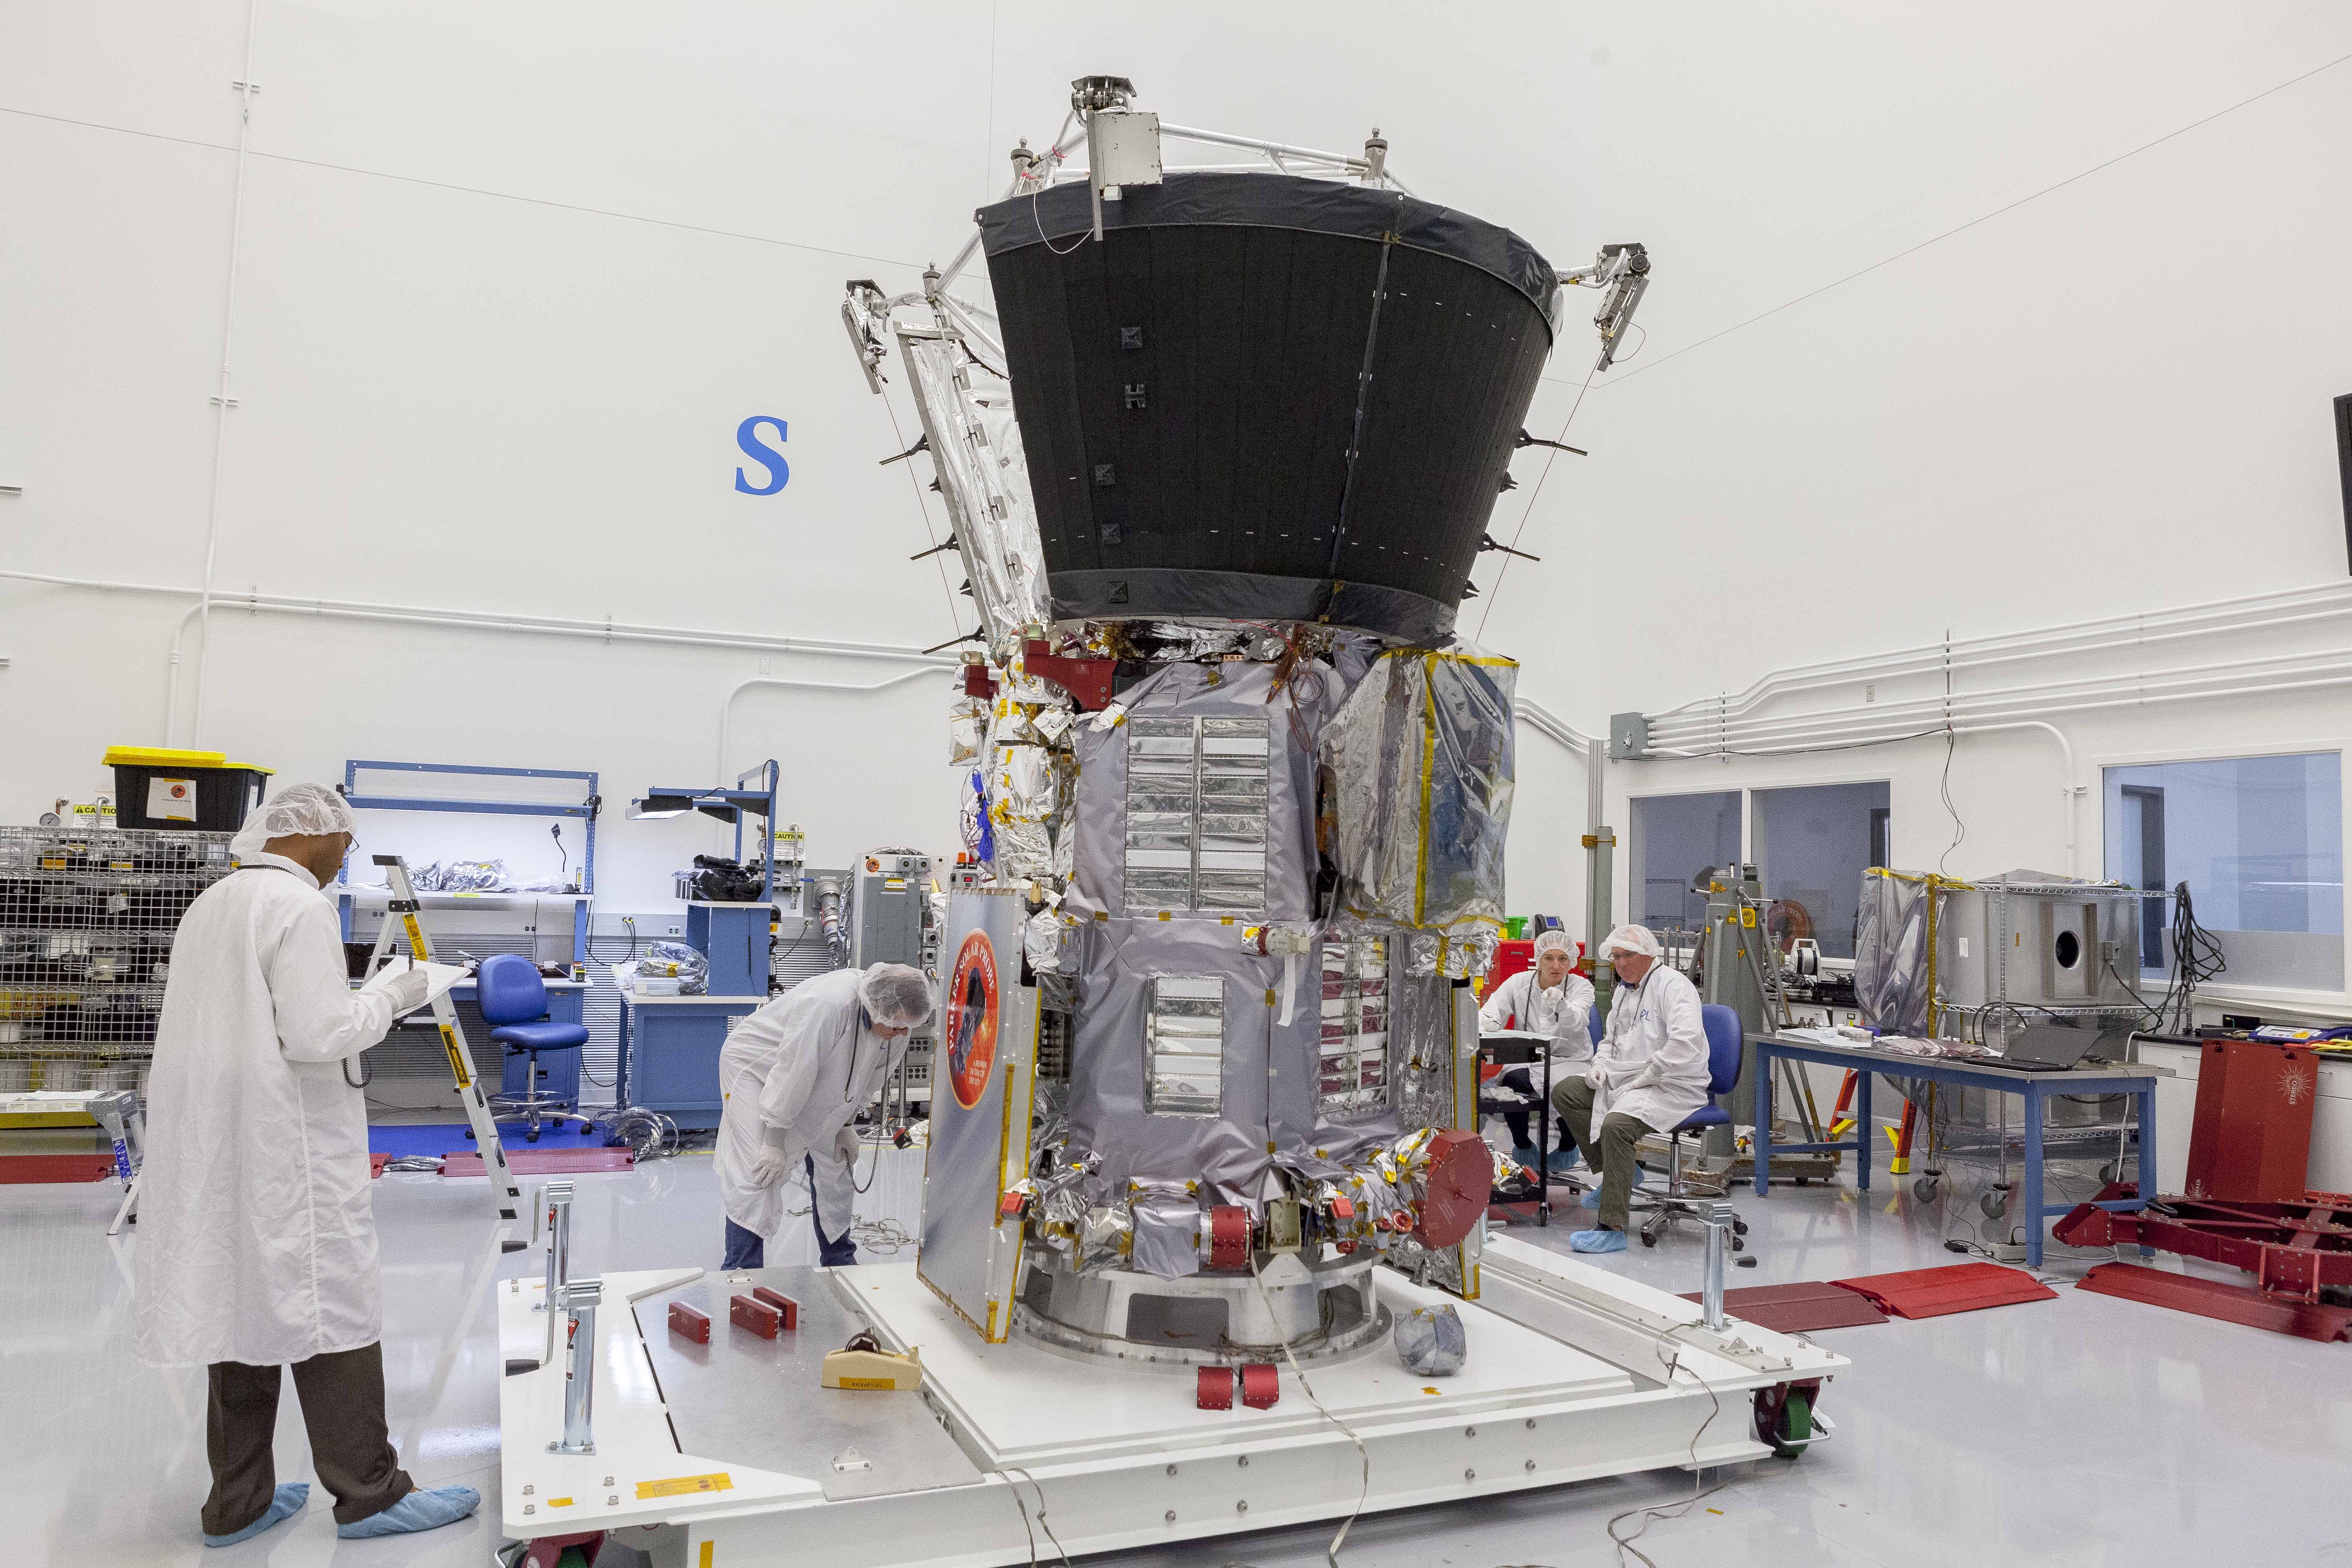 Engineers and technicians prepare the Parker Solar Probe spacecraft for mass properties testing. This marks the beginning of environmental testing, a series of physical tests that will ensure the probe can withstand the rigors of launch and temperature fluctuations of space operations. 